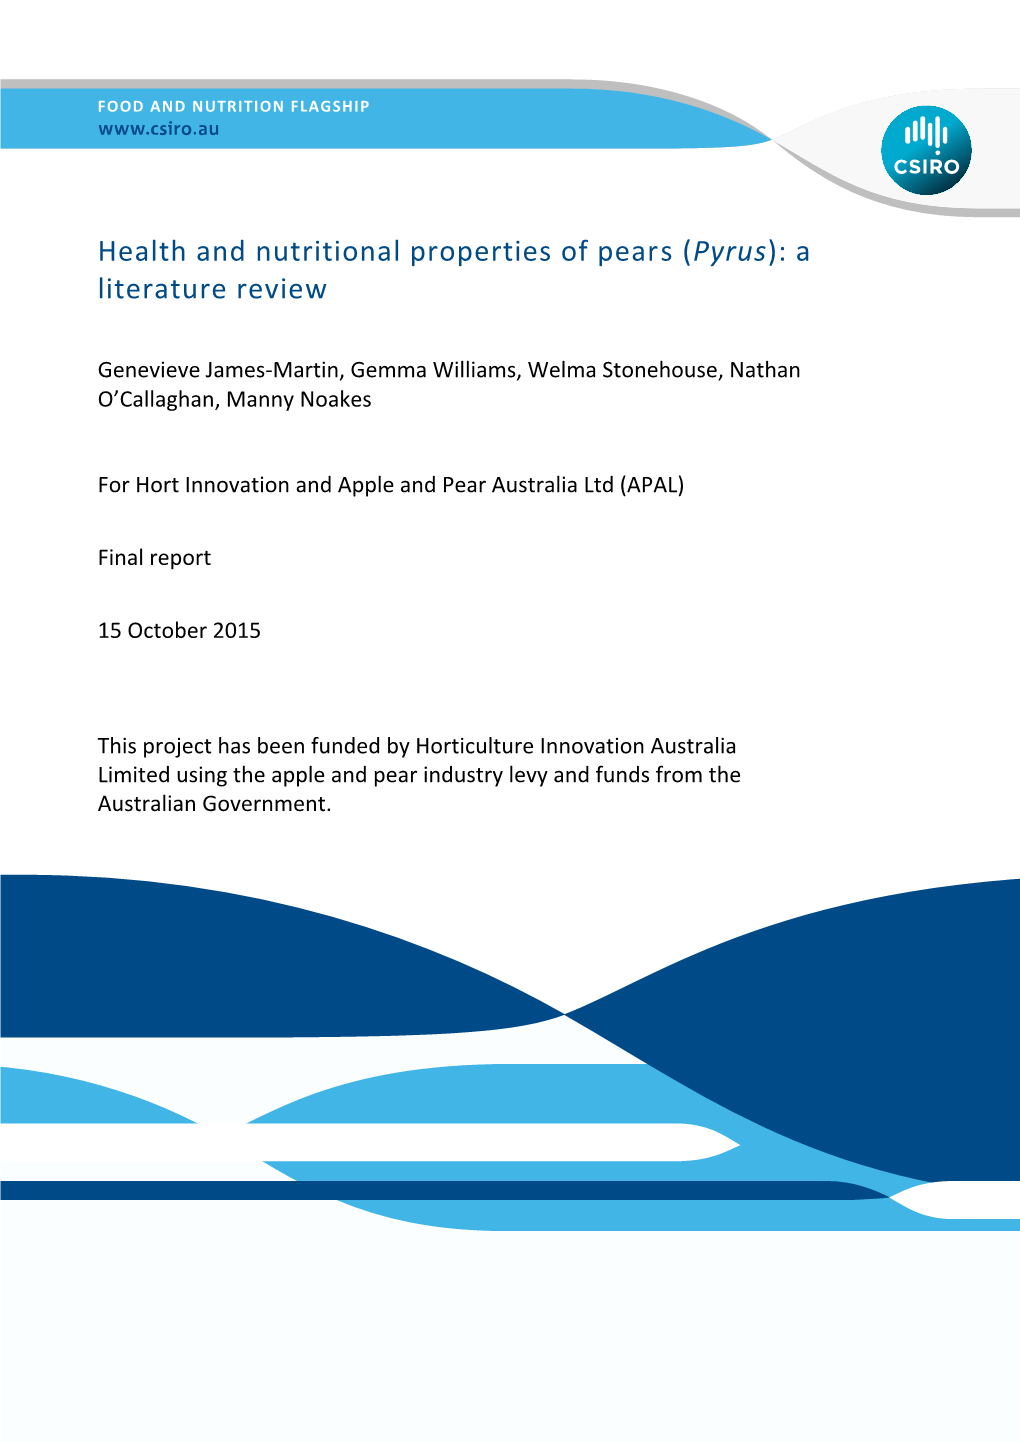 Health and Nutritional Properties of Pears (Pyrus): a Literature Review